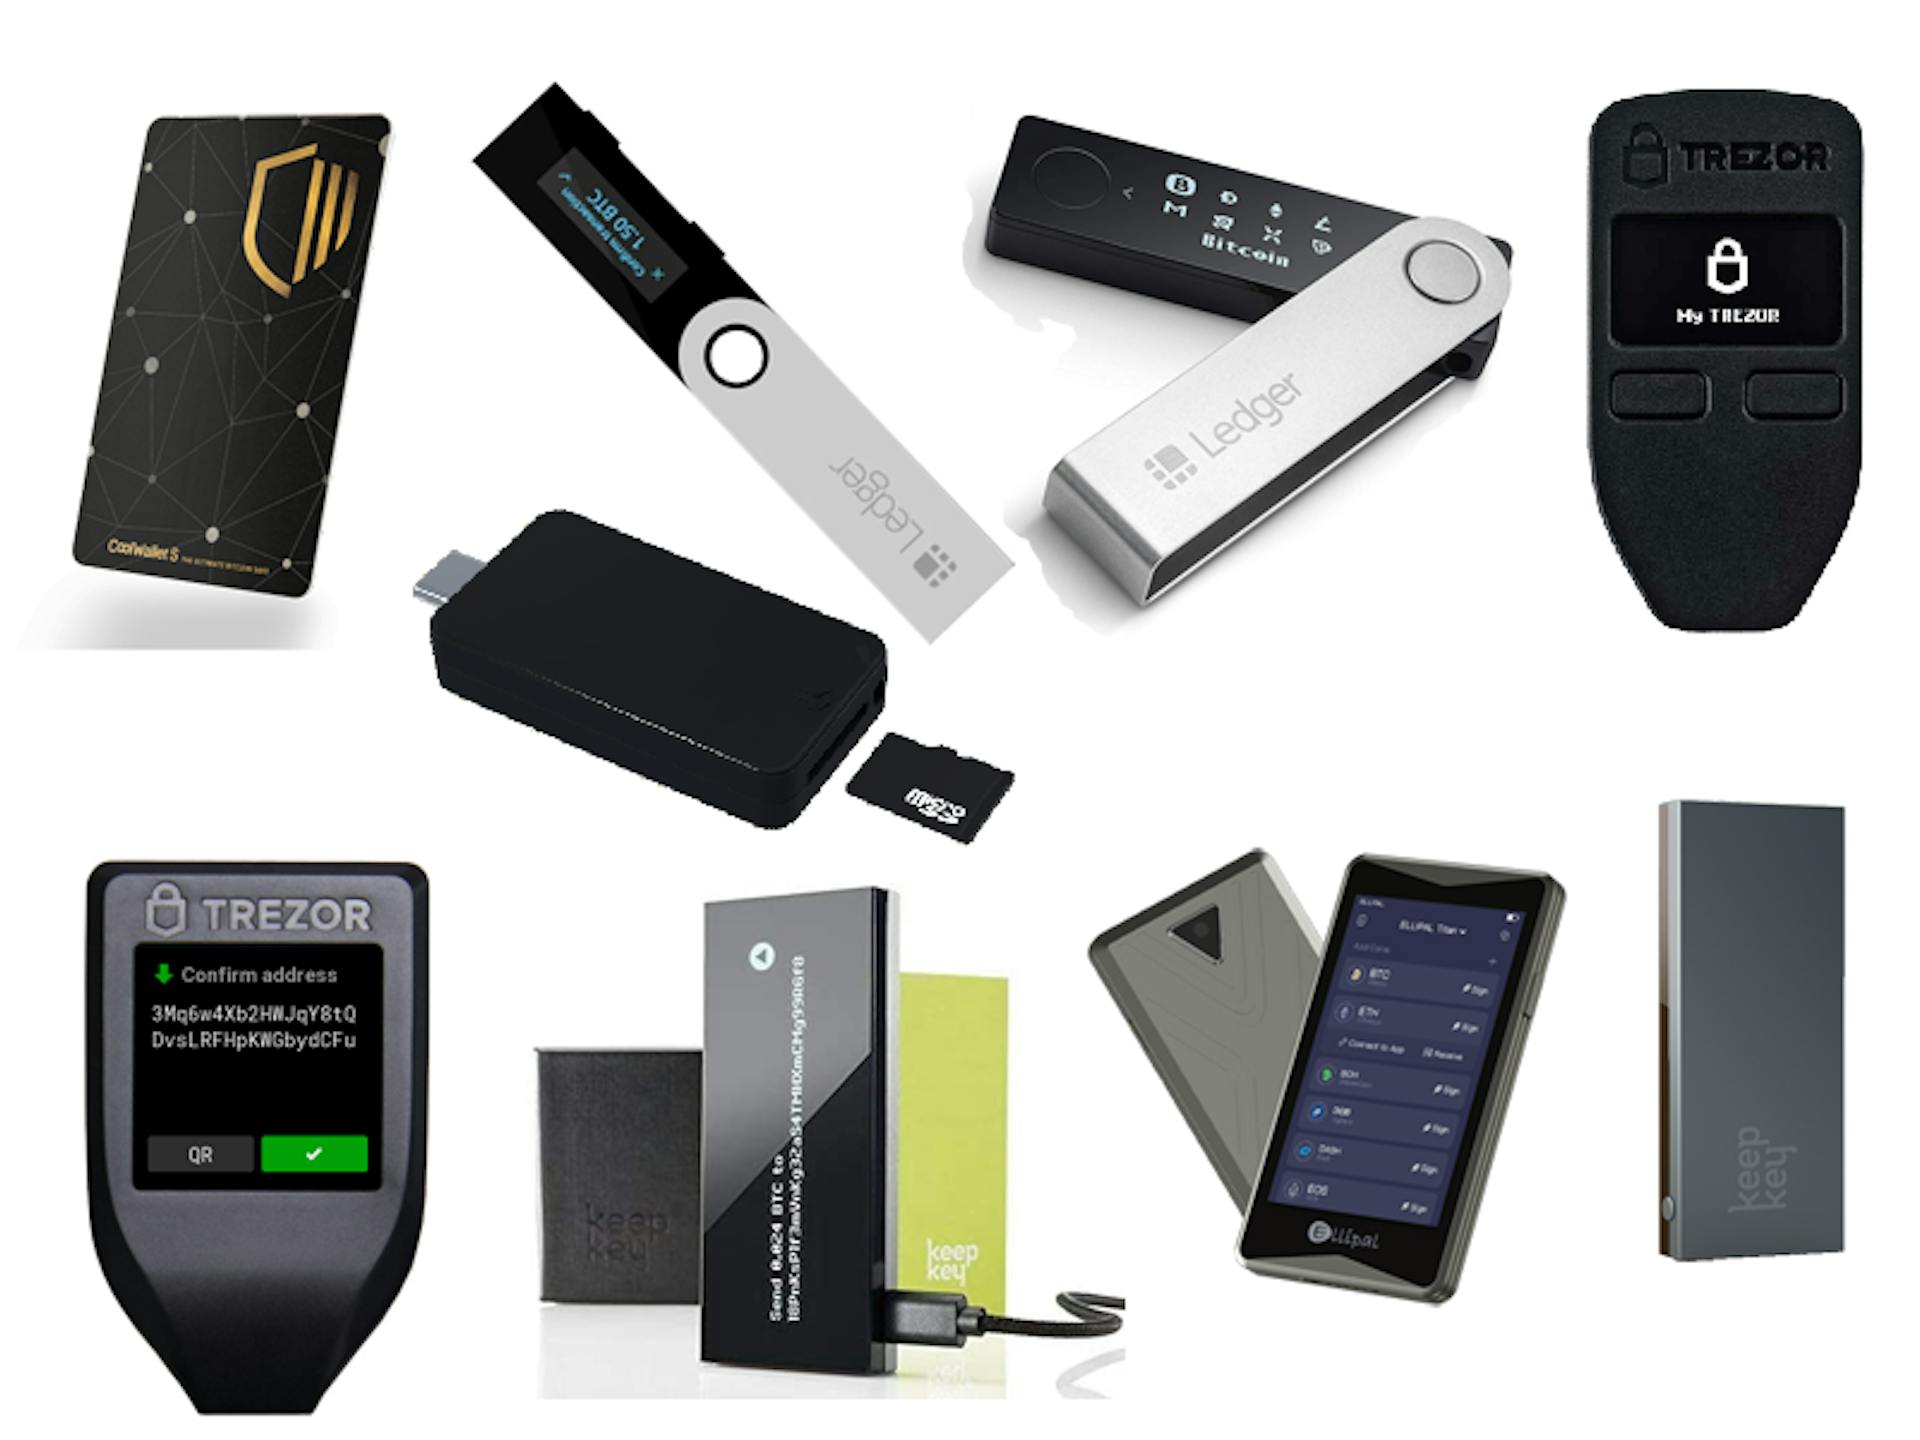 Hardware Wallet Examples